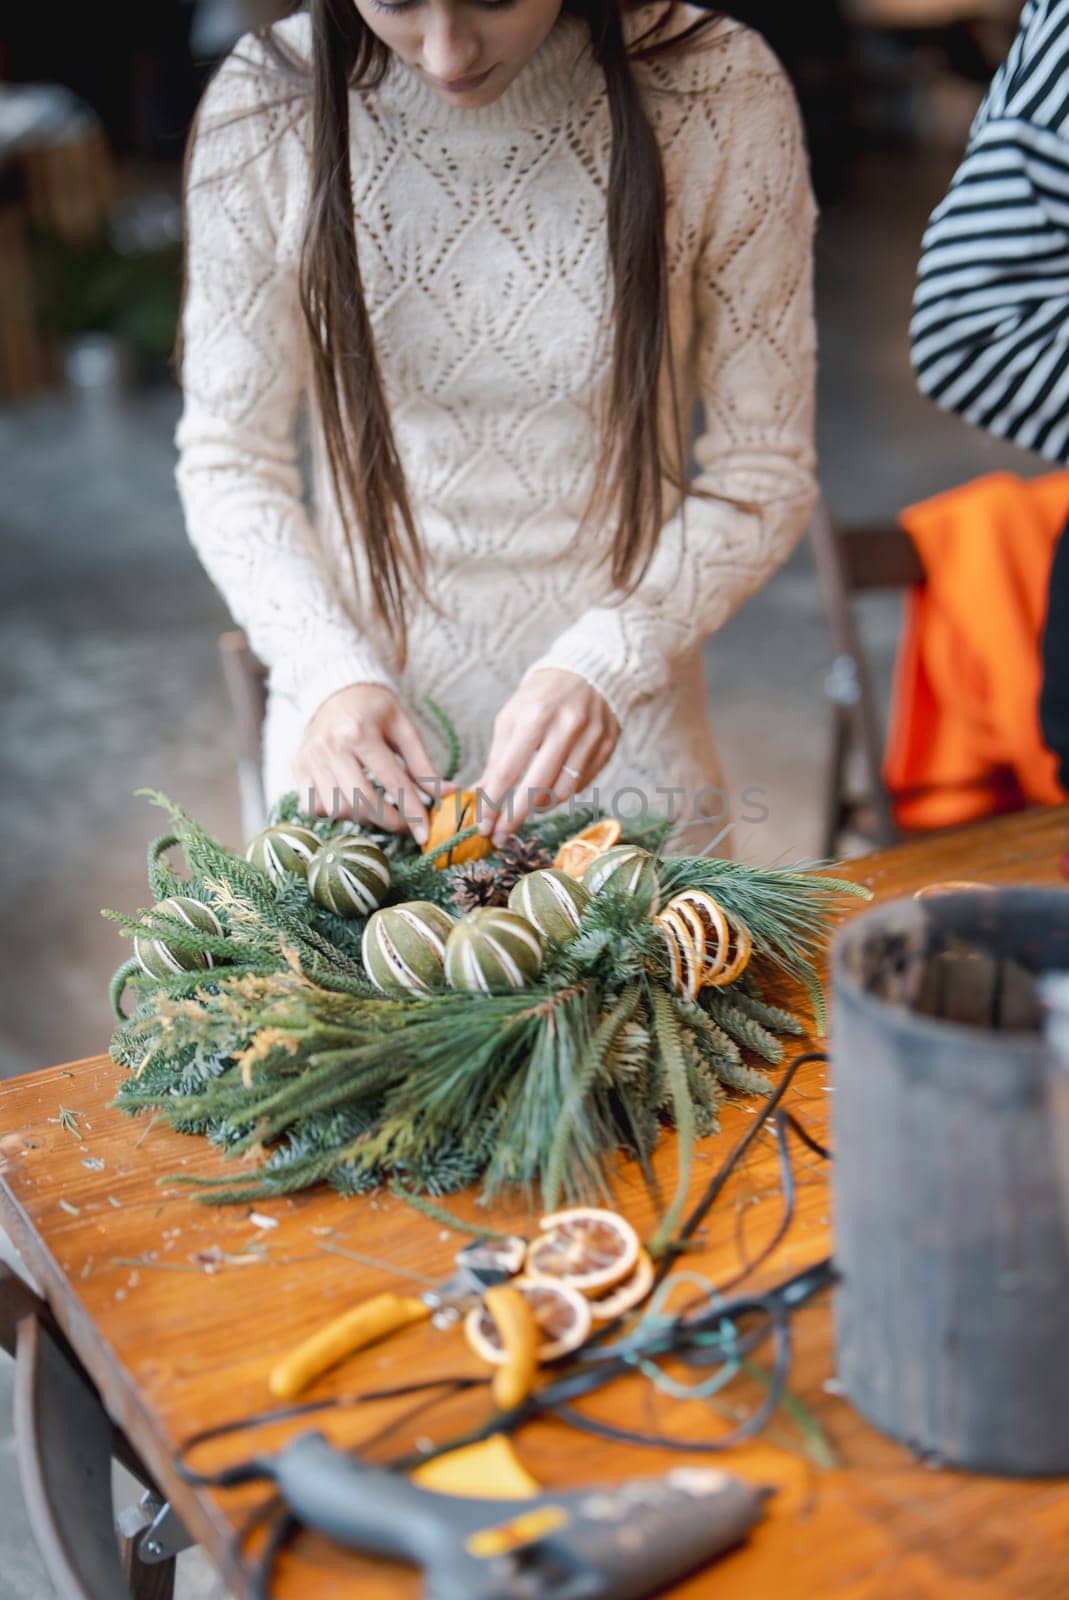 A gorgeous young lady enthusiastically participating in a holiday decoration workshop. High quality photo